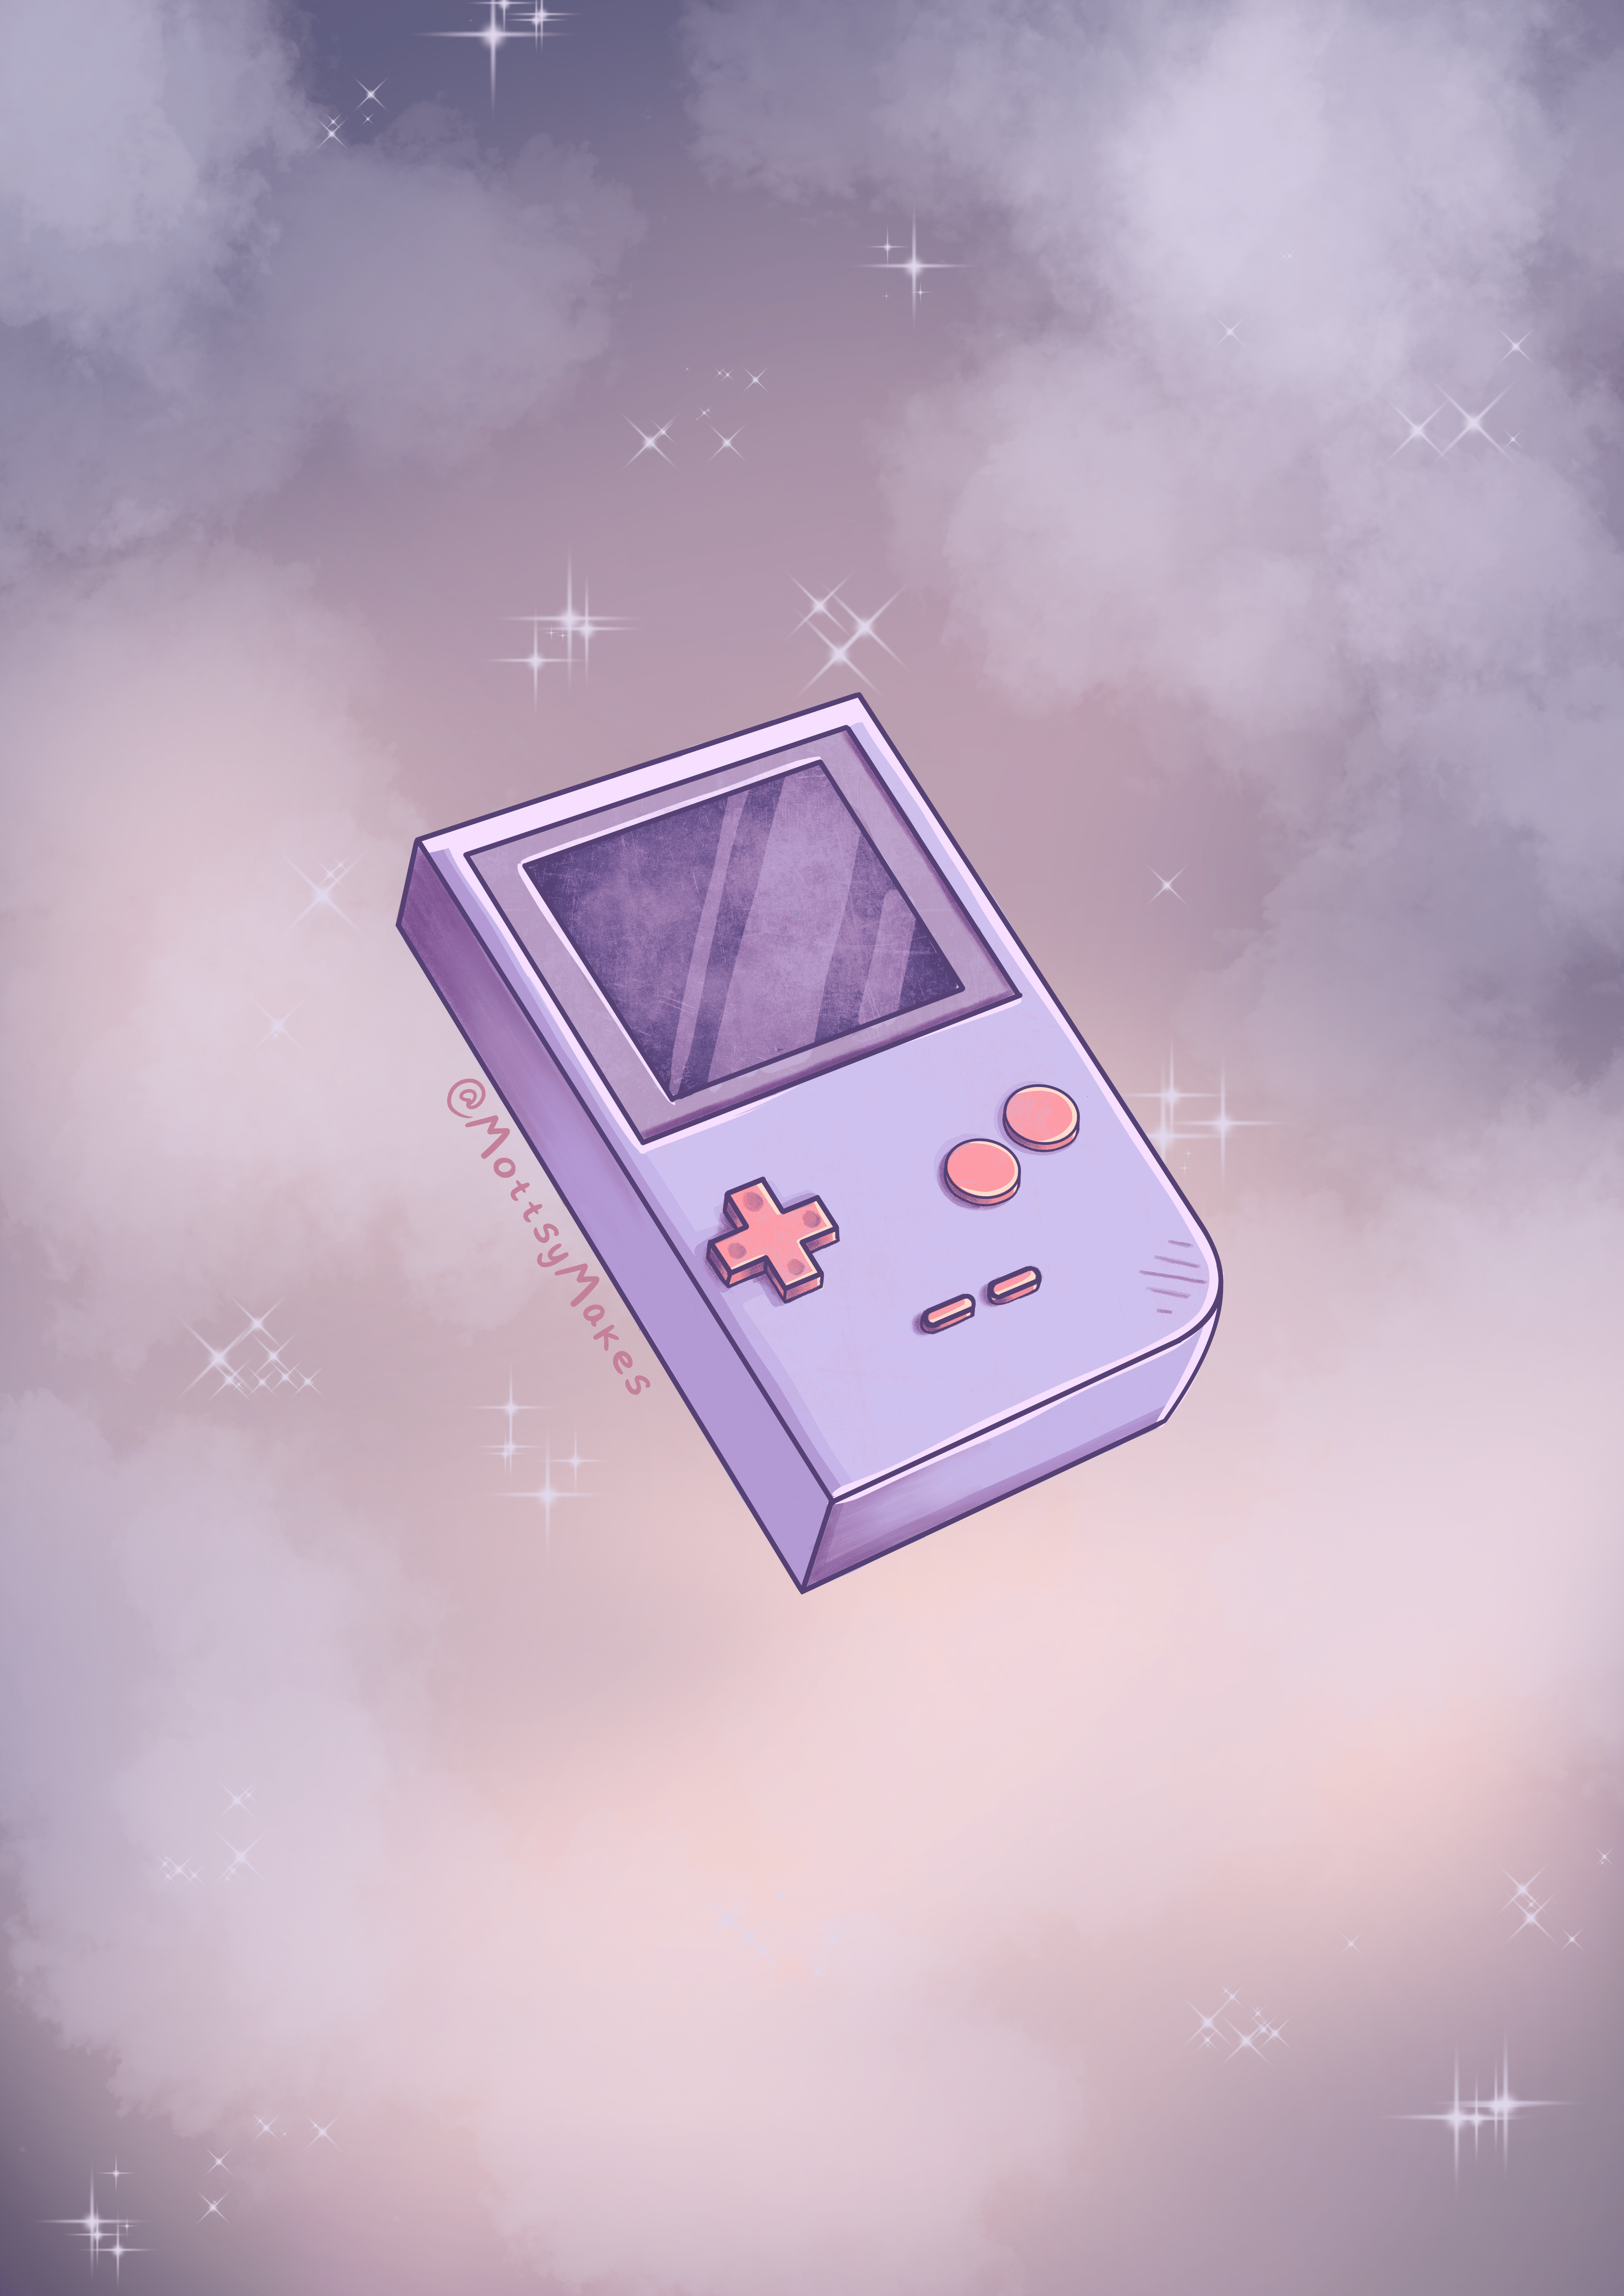 A purple Gameboy floating in a cloudy sky - Game Boy